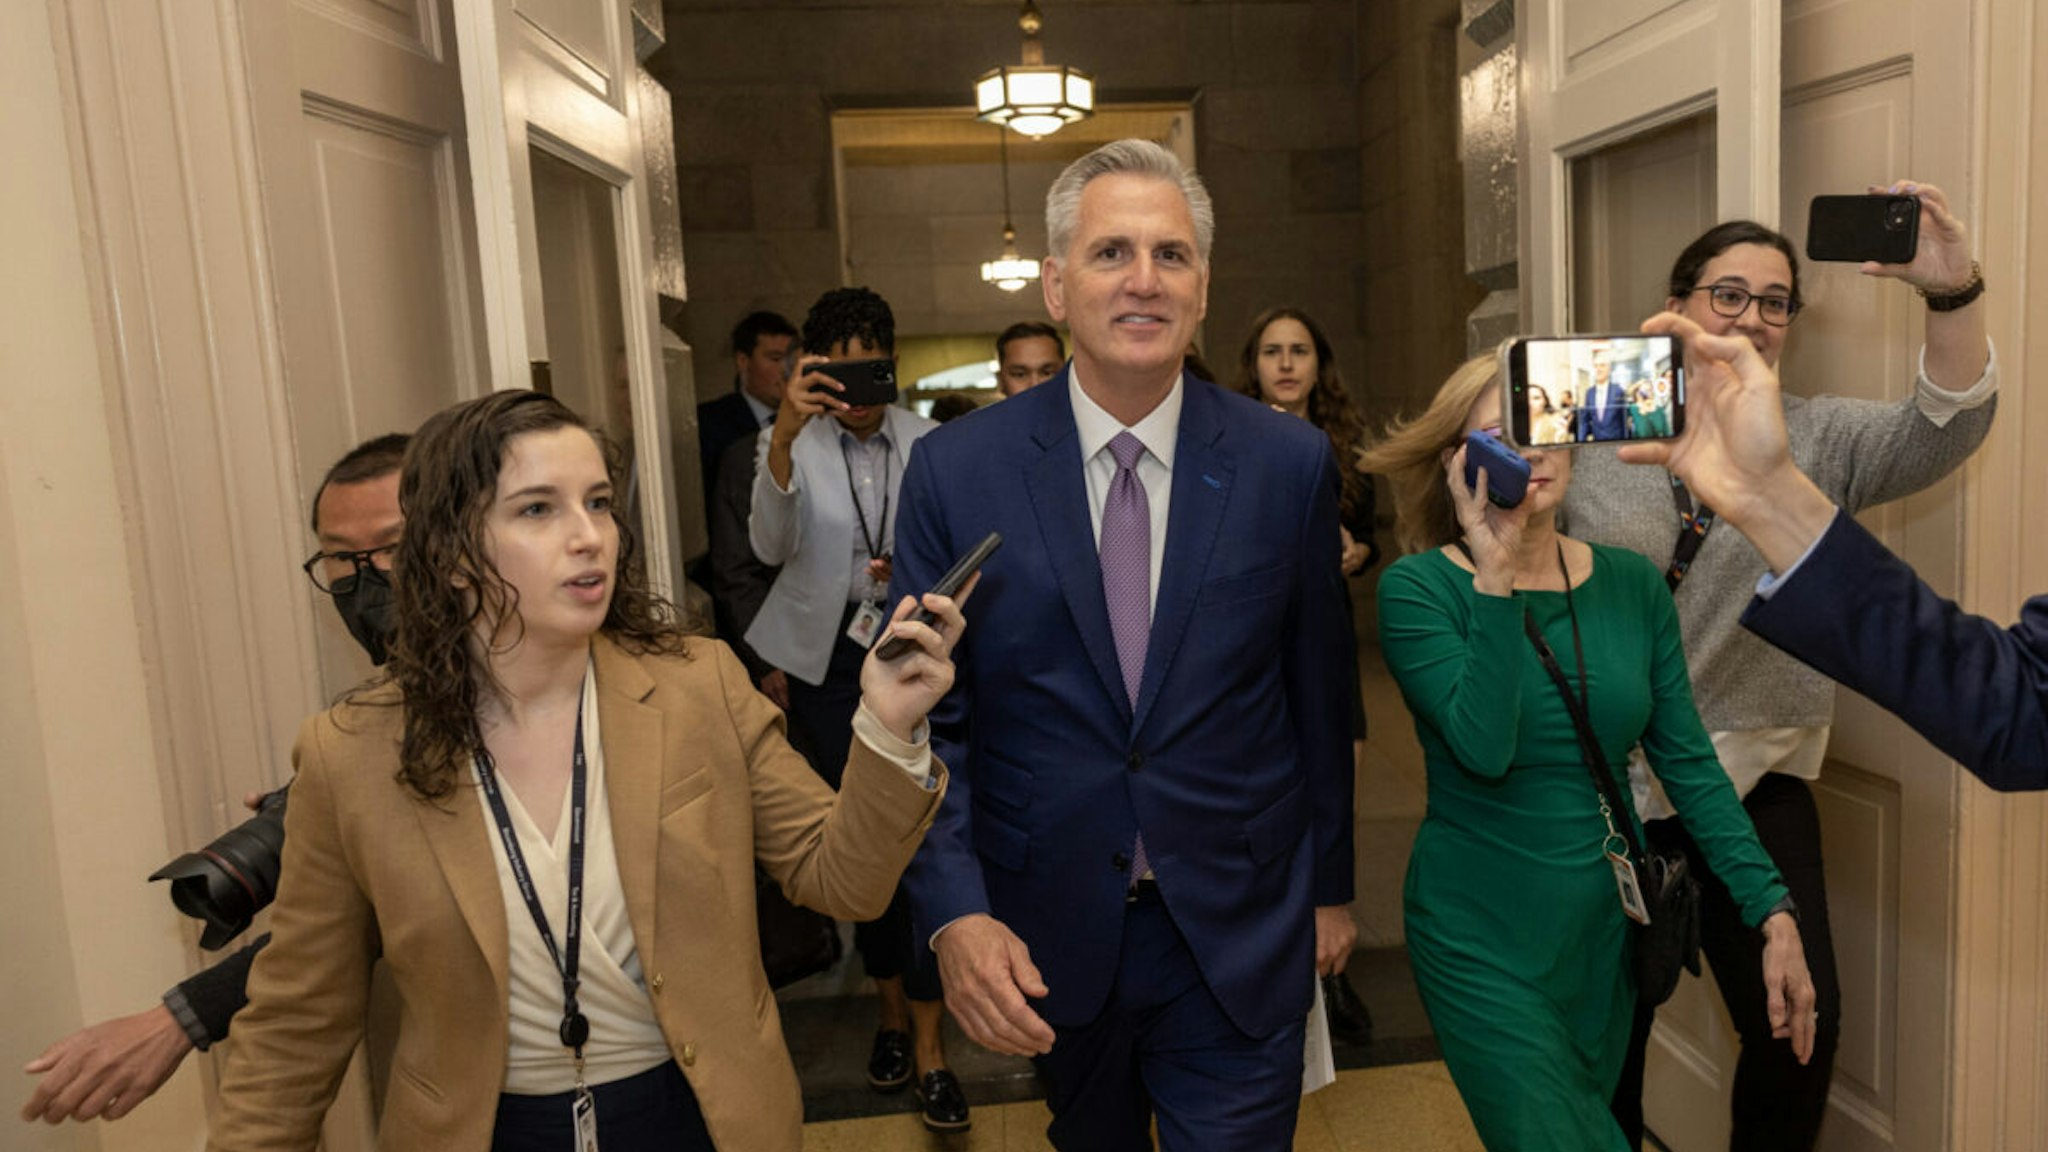 U.S. Speaker of the House Rep. Kevin McCarthy (R-CA) is followed by members of the media as he walks in the U.S. Capitol on April 26, 2023 in Washington, DC.